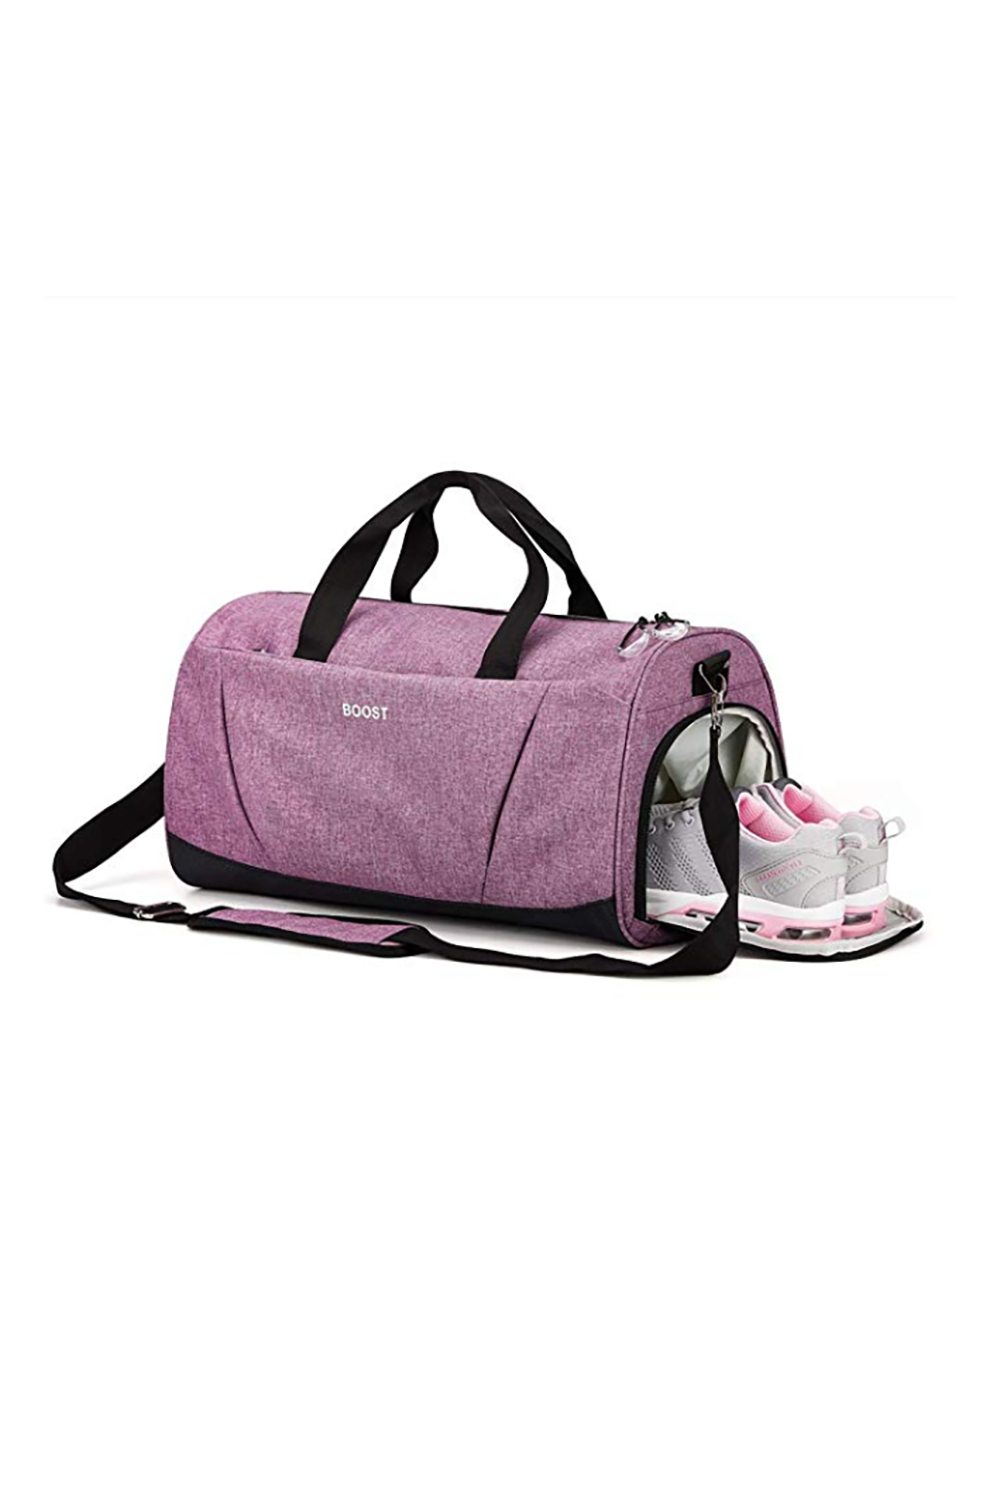 gym backpack women's